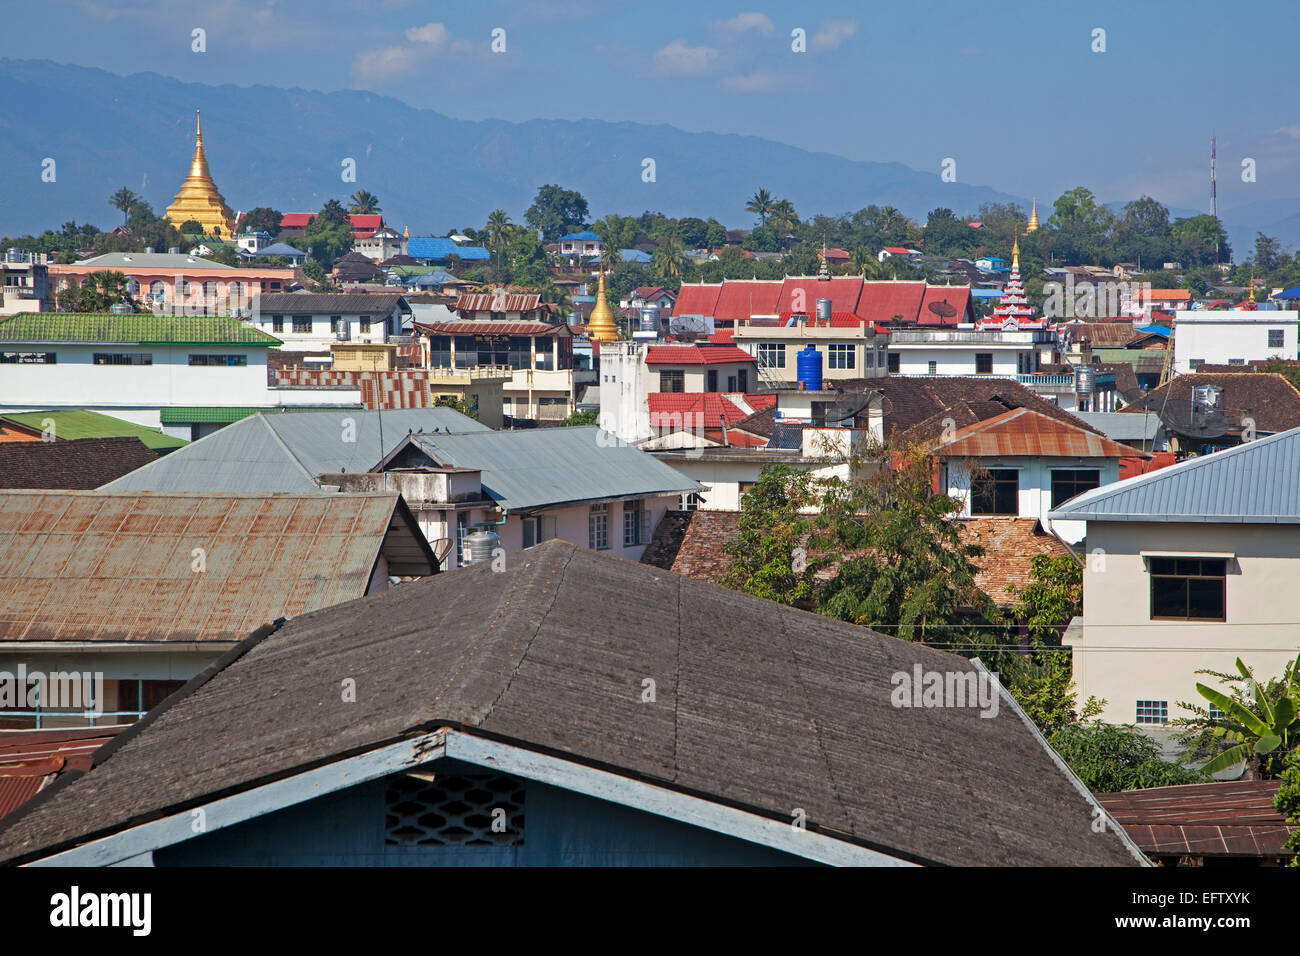 View over rooftops, Buddhist temples and stupas in the town Keng Tung / Kengtung, Shan State, Myanmar / Burma Stock Photo